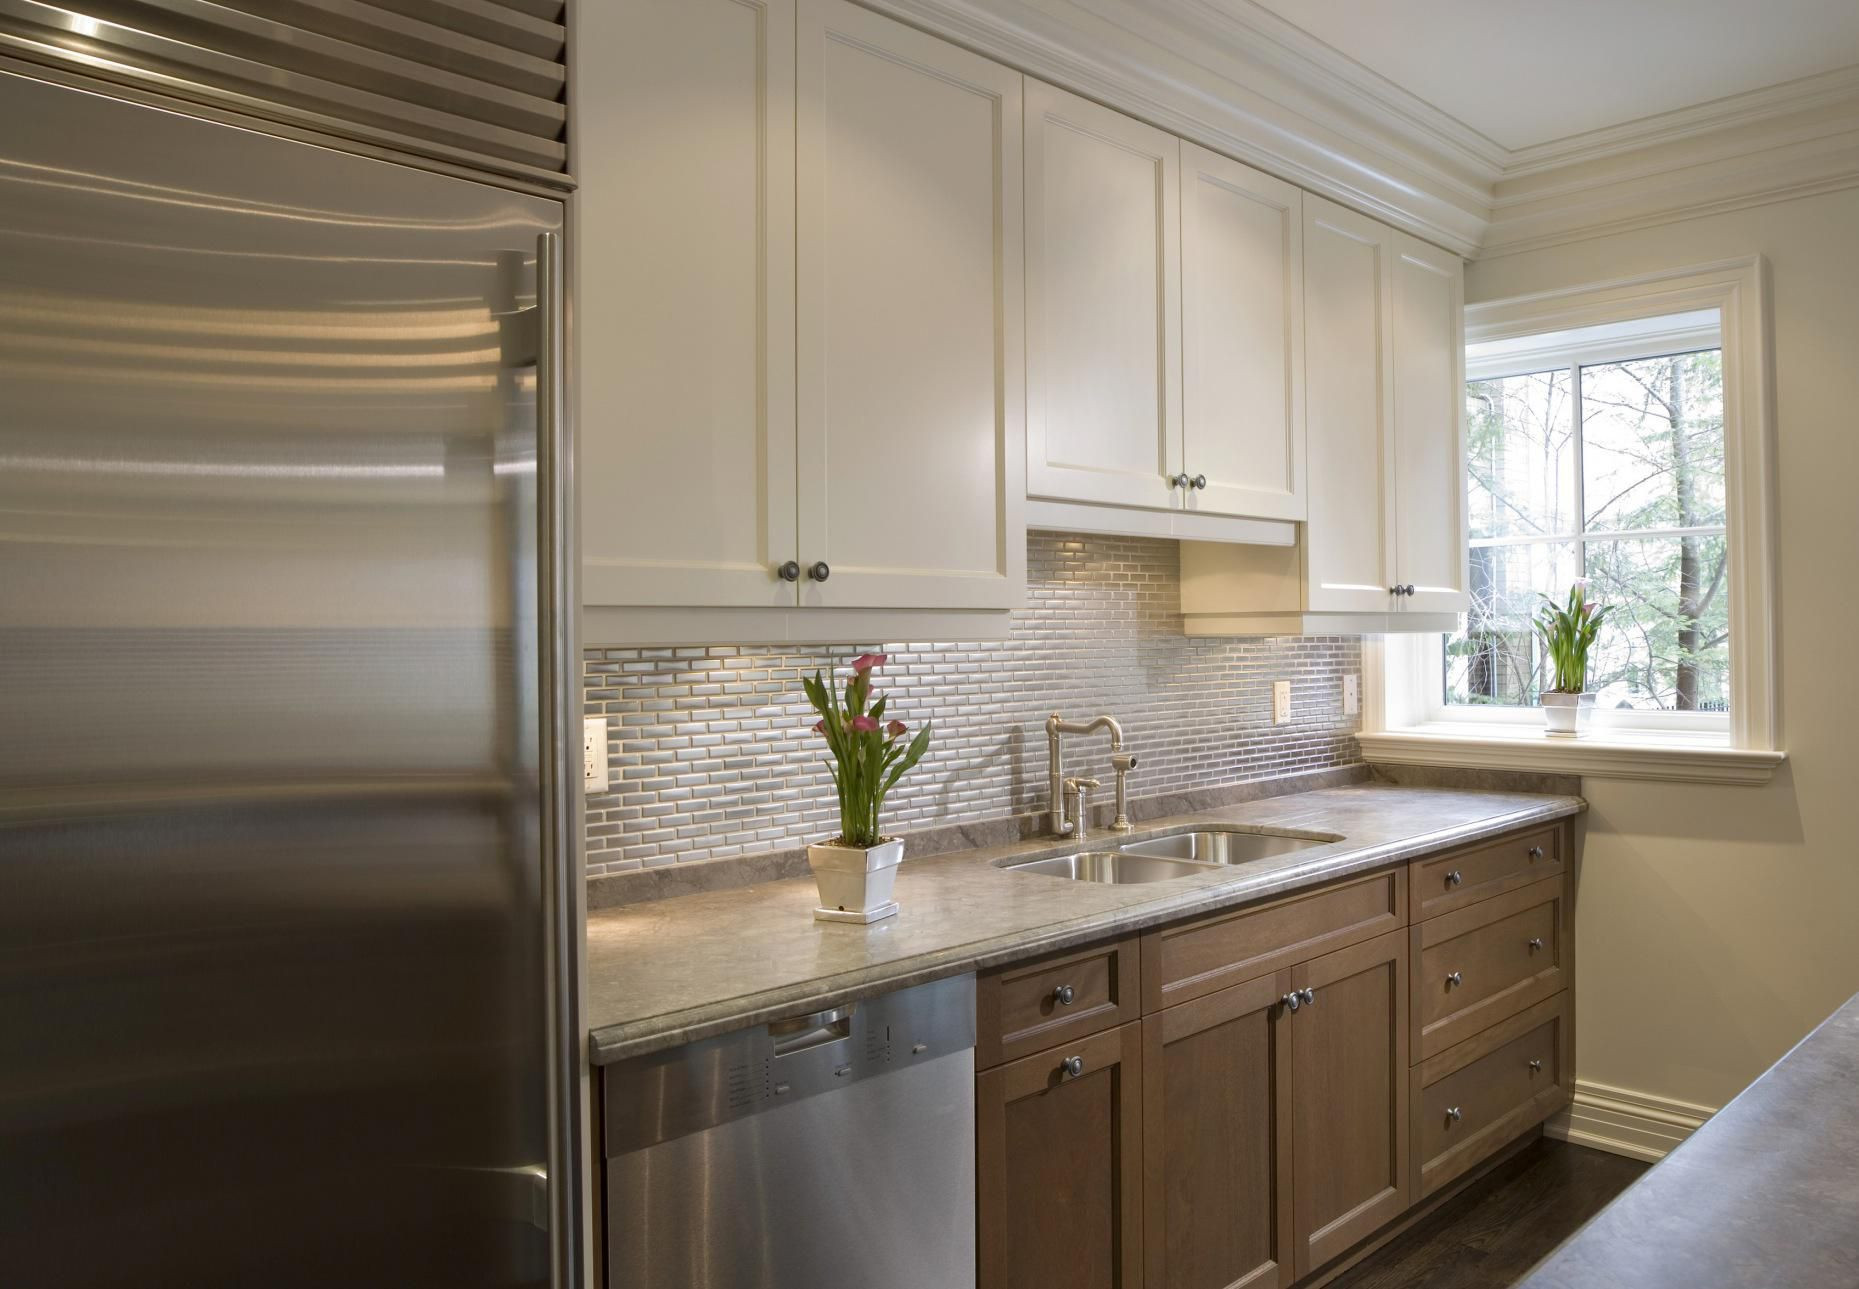 Kitchen Remodels For Small Kitchens
 Small Kitchen Remodeling Home Renovations